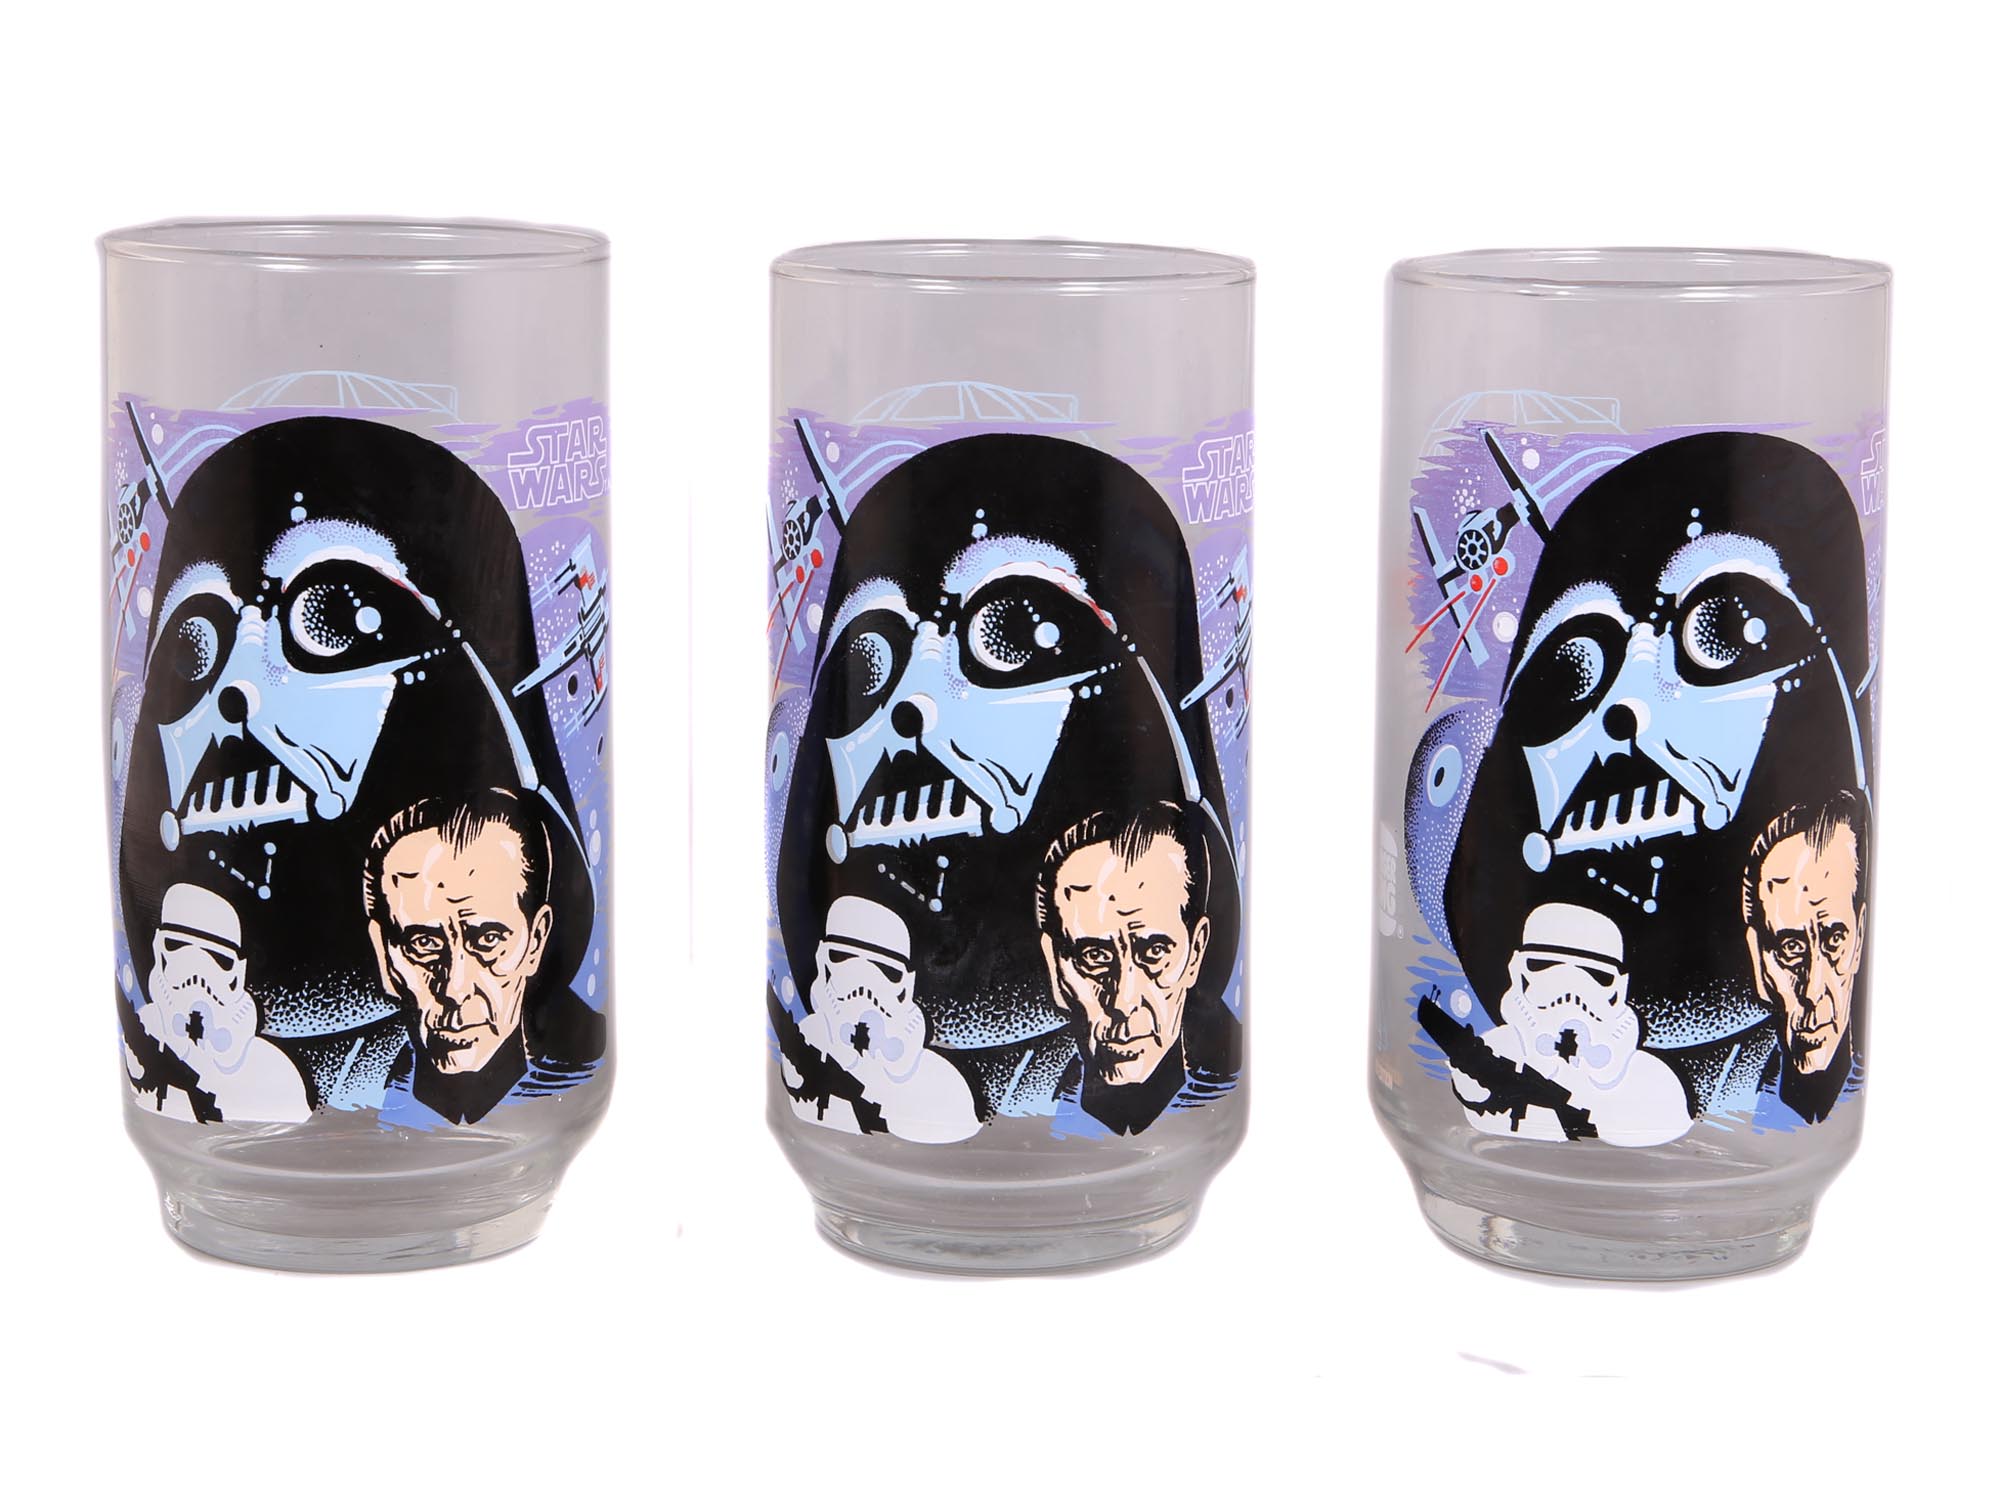 STAR WARS AND DUKE OF DOUBT GLASS SETS VINTAGE PIC-3